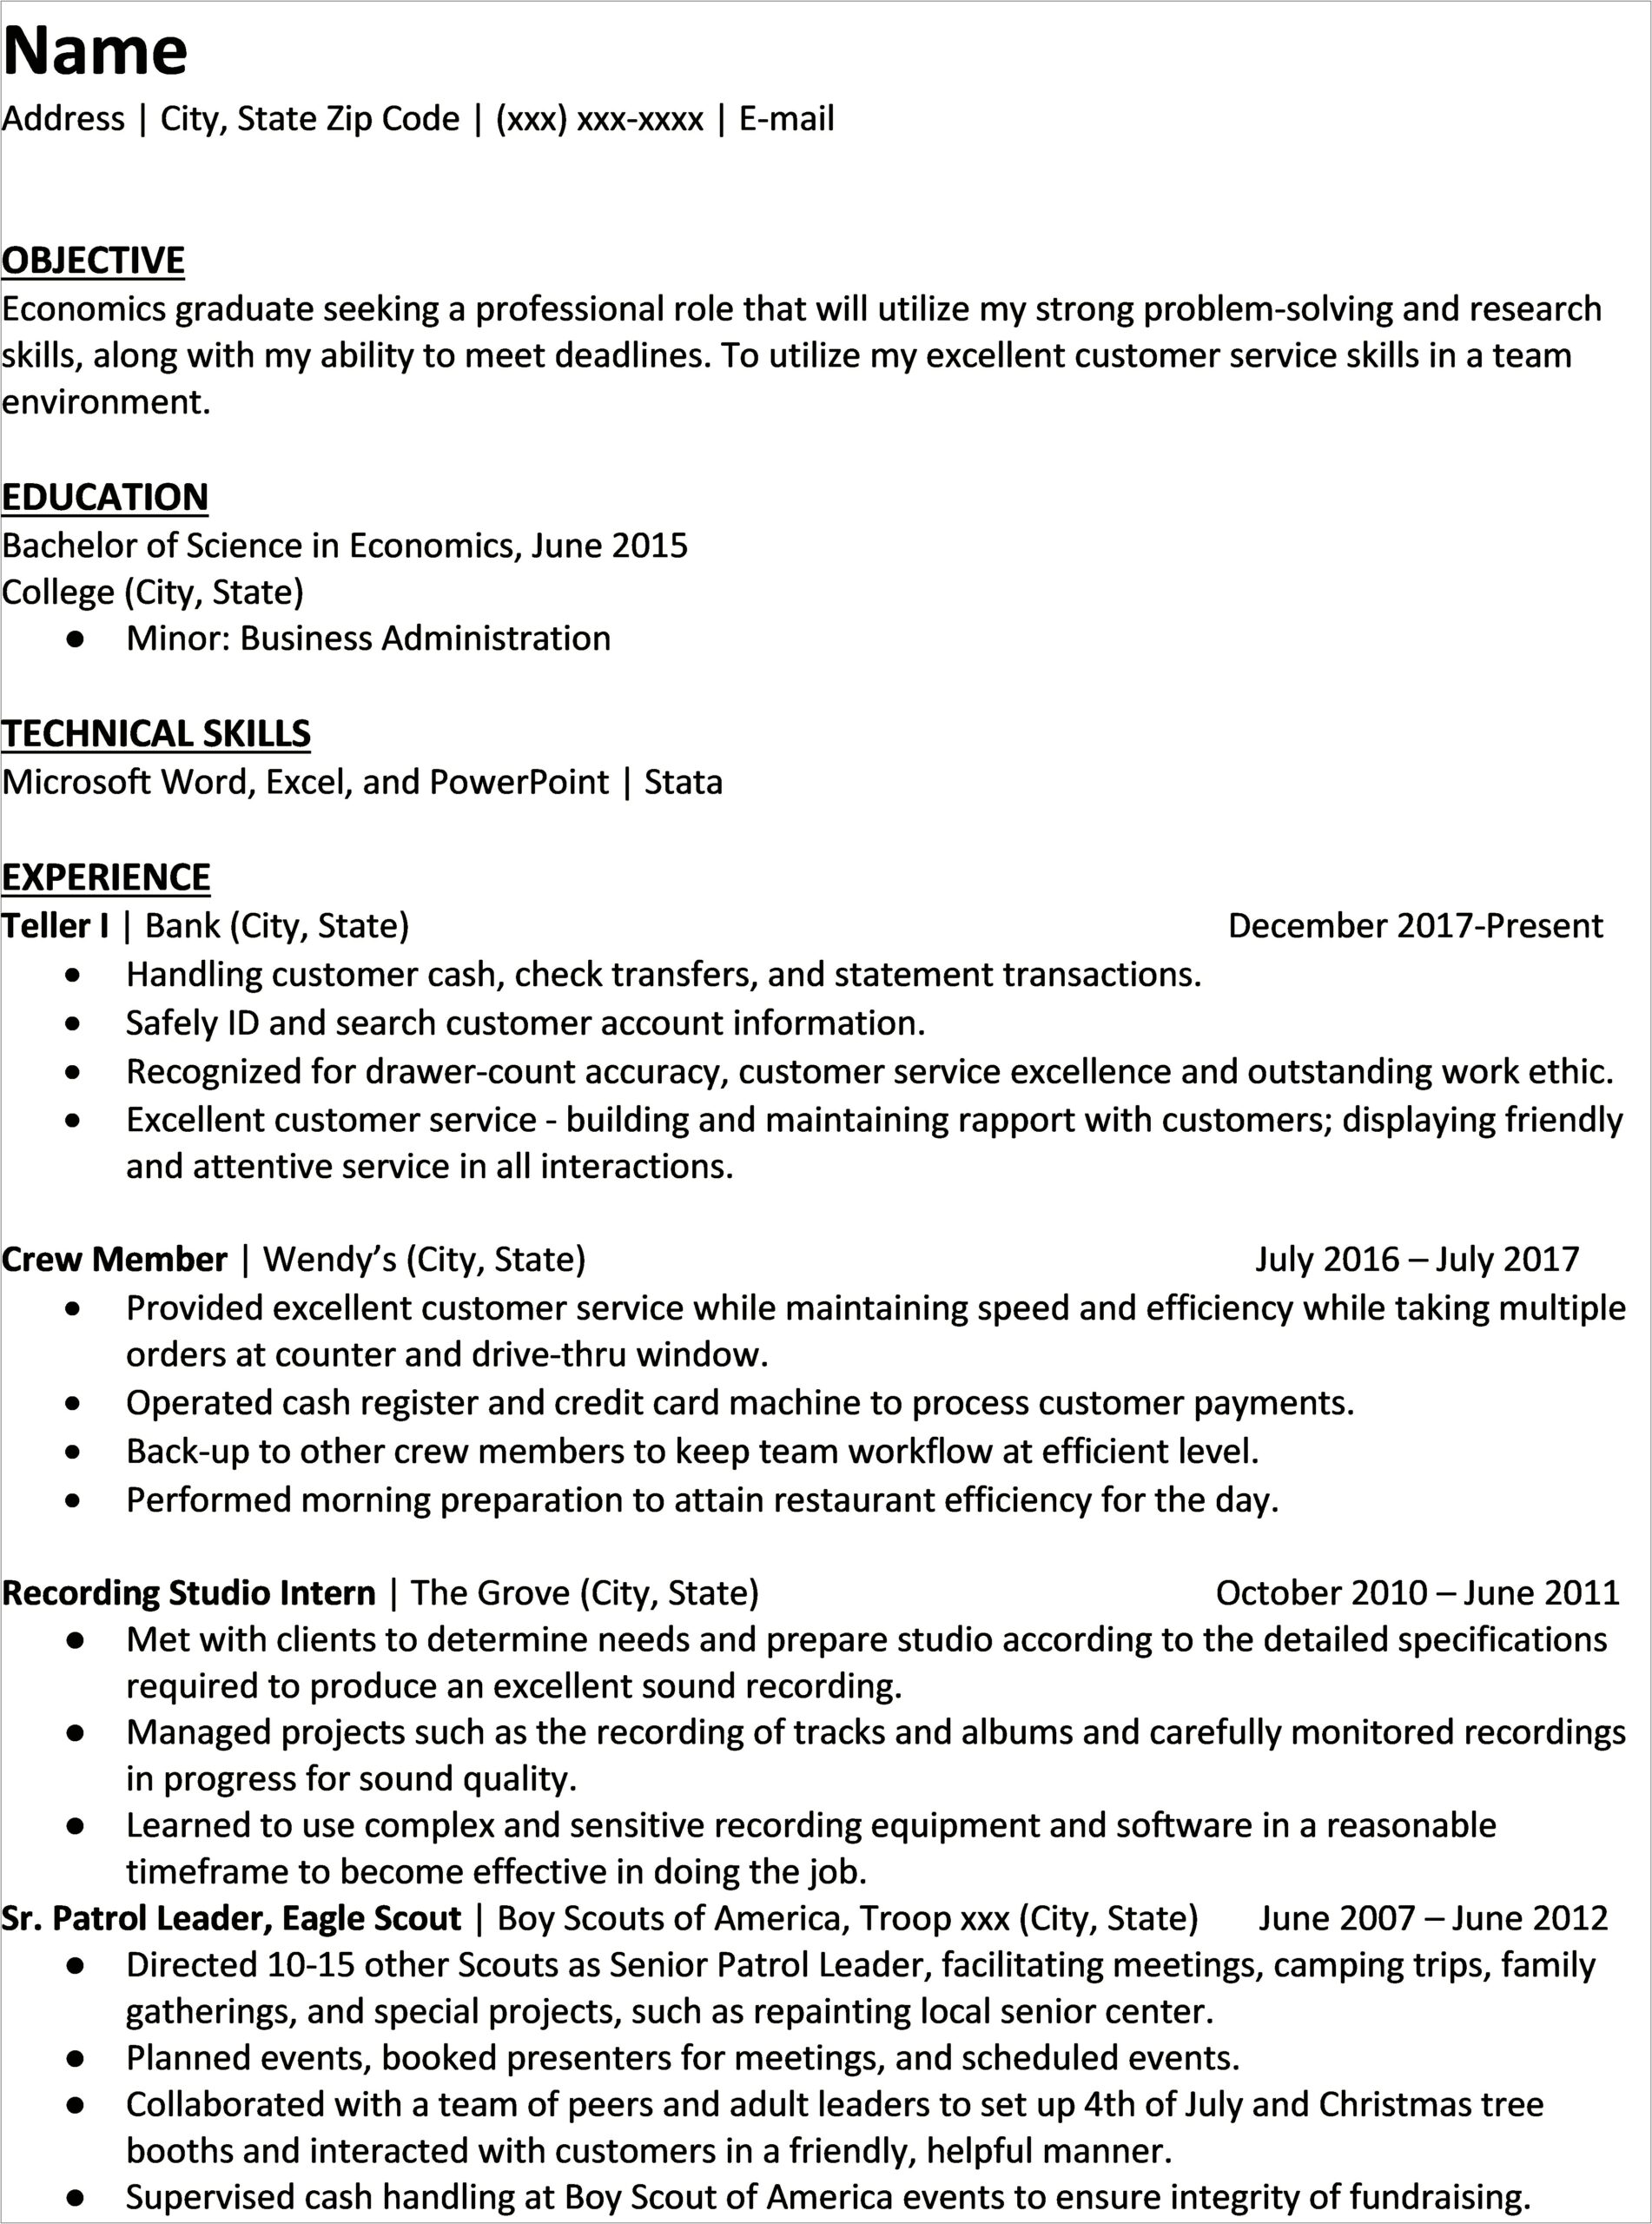 Putting Restaurant Experience On A Business Resume